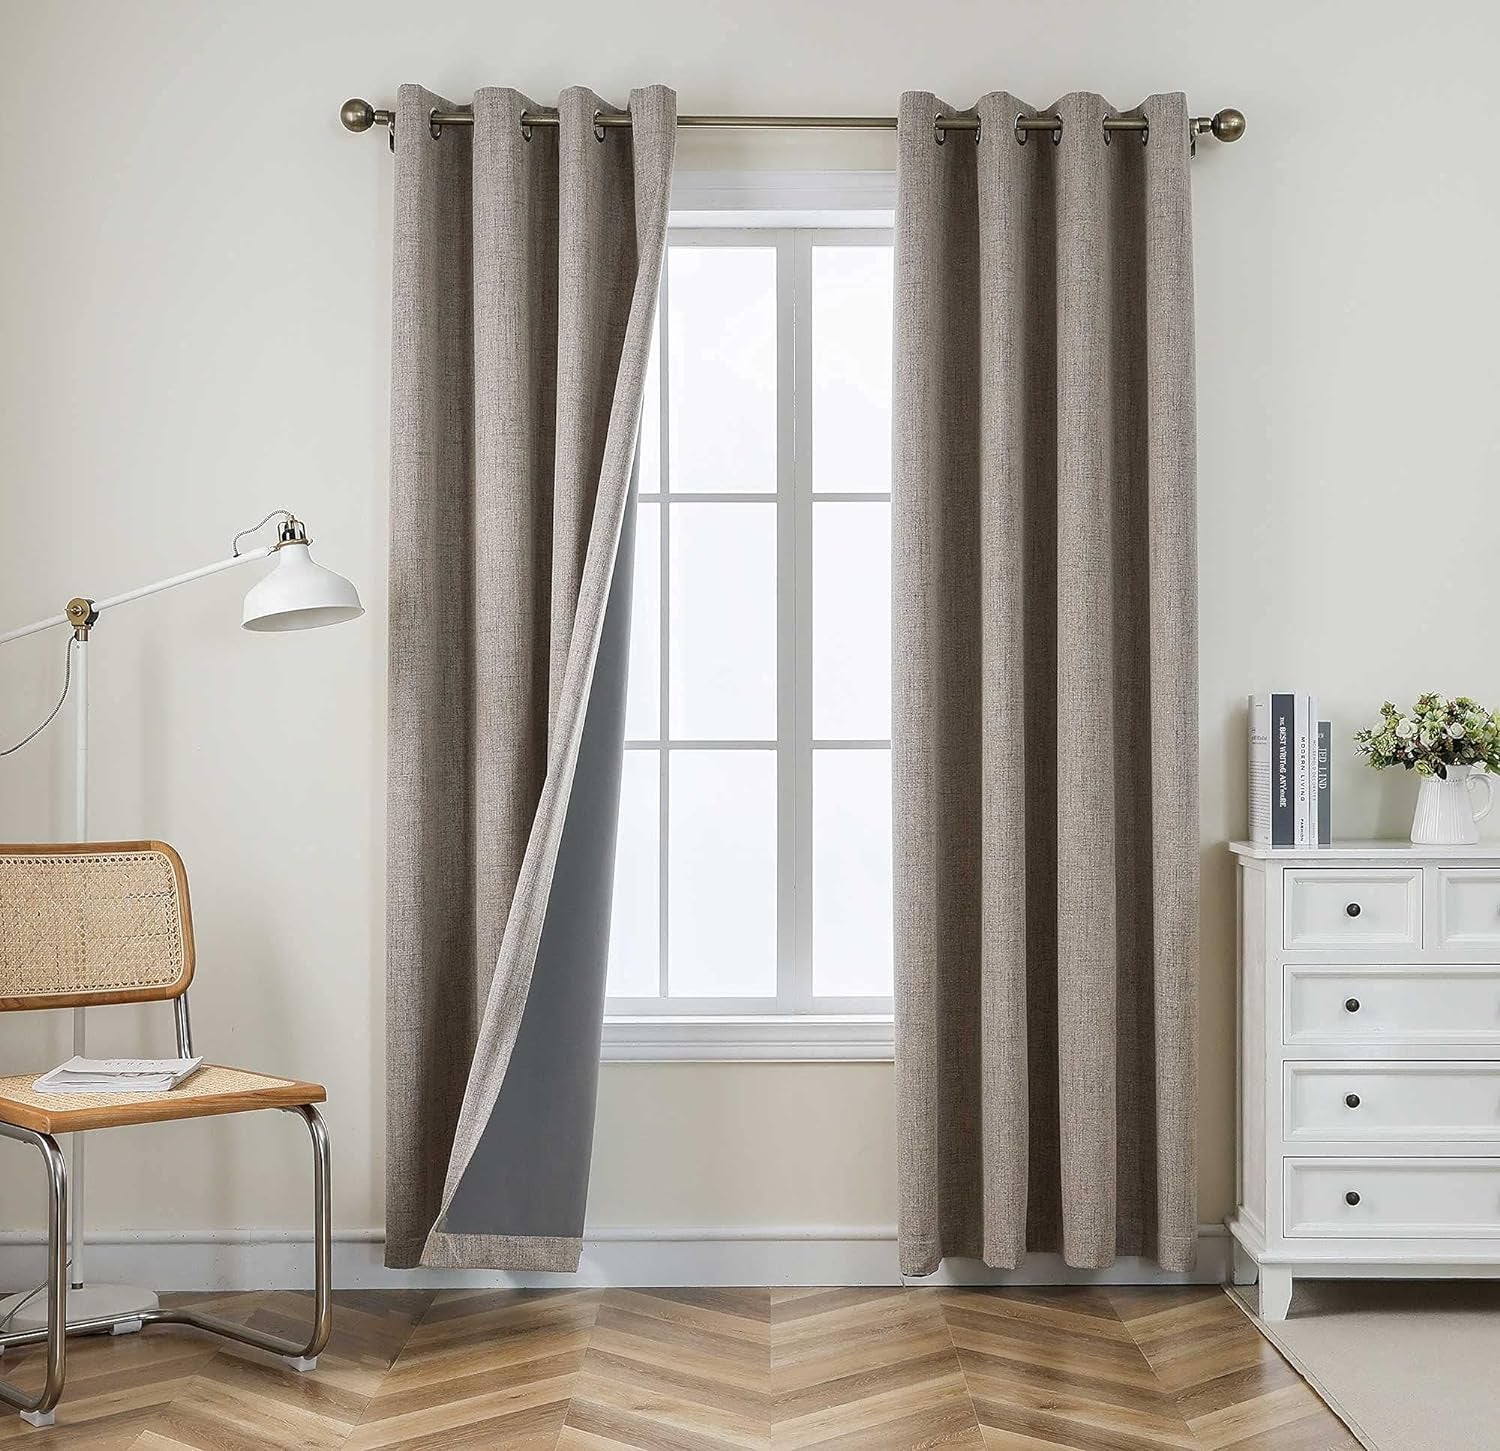 CUCRAF Full Blackout Window Curtains 84 Inches Long,Faux Linen Look Thermal Insulated Grommet Drapes Panels for Bedroom Living Room,Set of 2(52 X 84 Inches, Light Khaki)  CUCRAF   